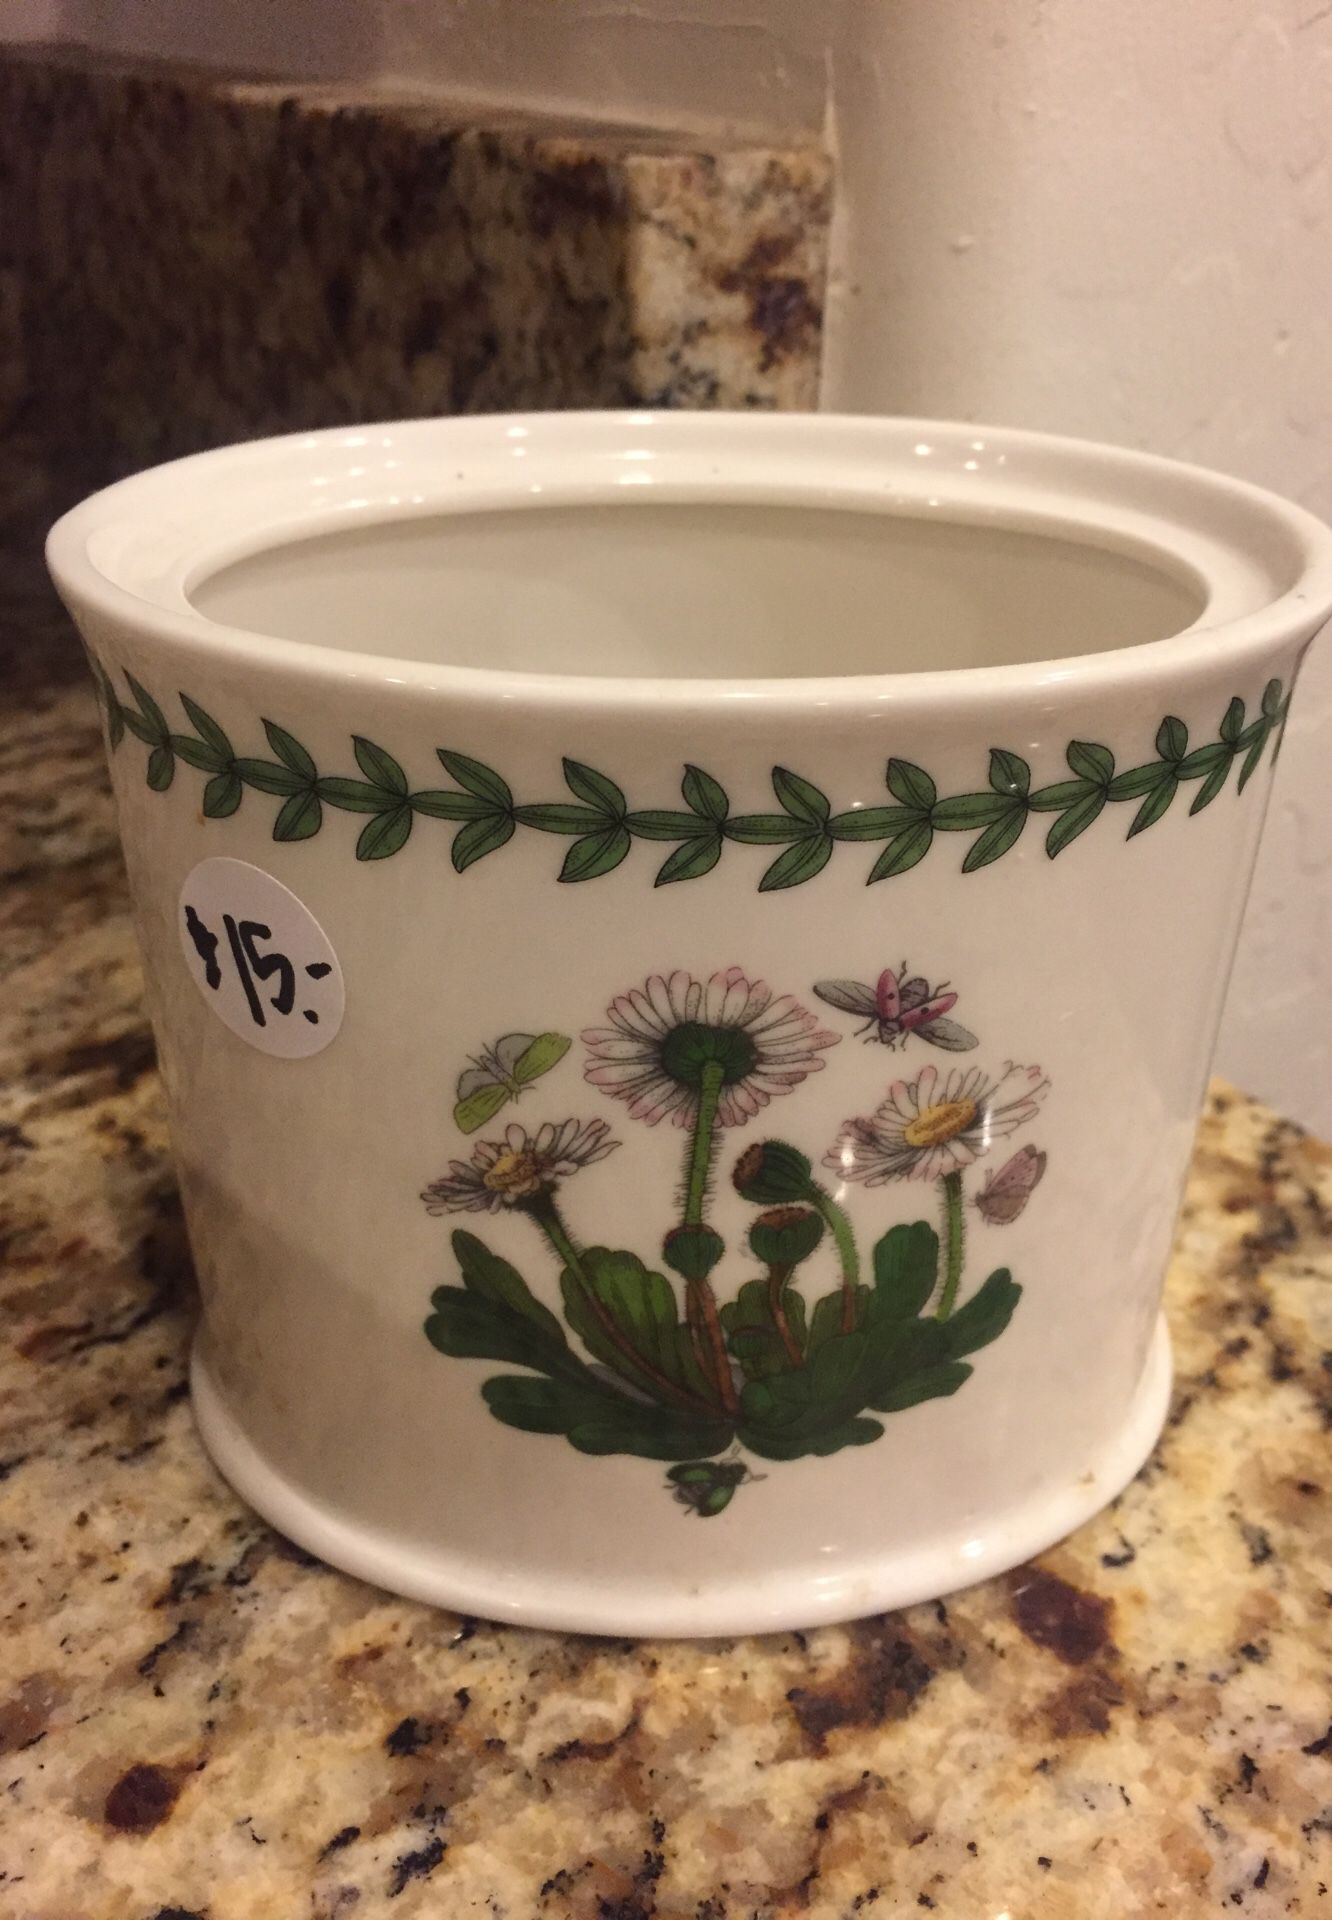 Portmerion toothbrush holder or other container